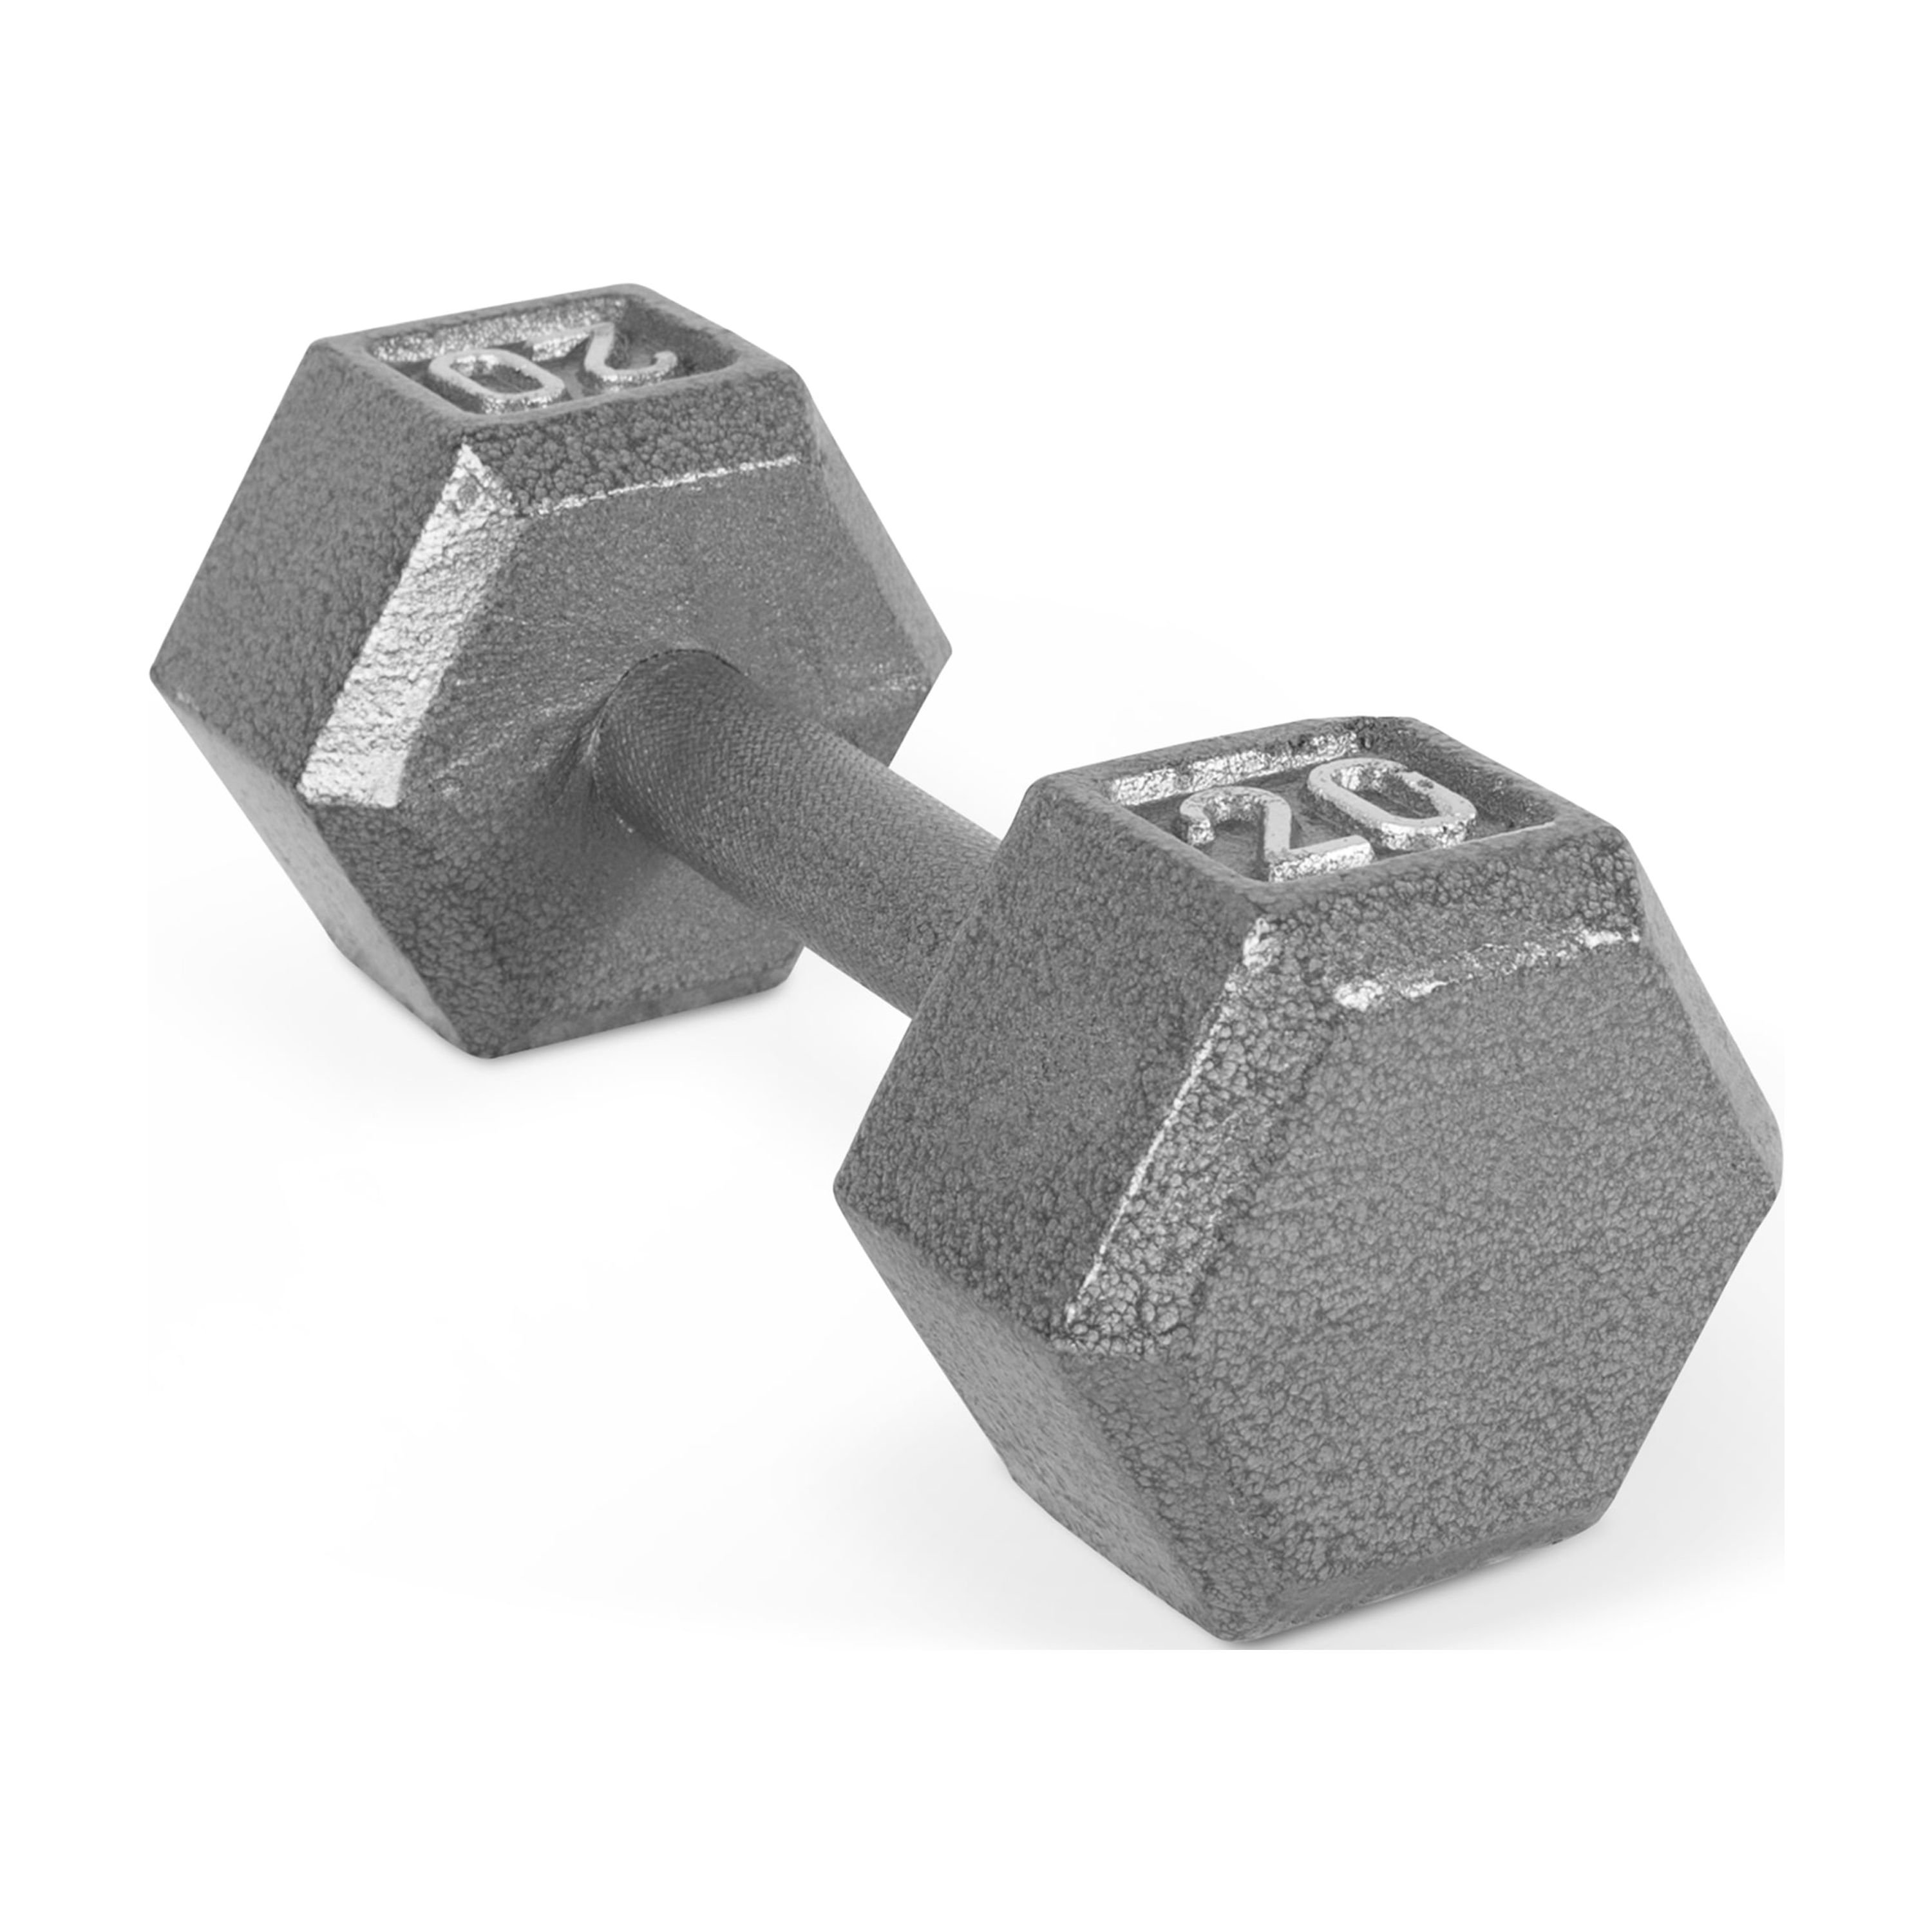 CAP Barbell 20lb Cast Iron Hex Dumbbell, Single - image 1 of 6